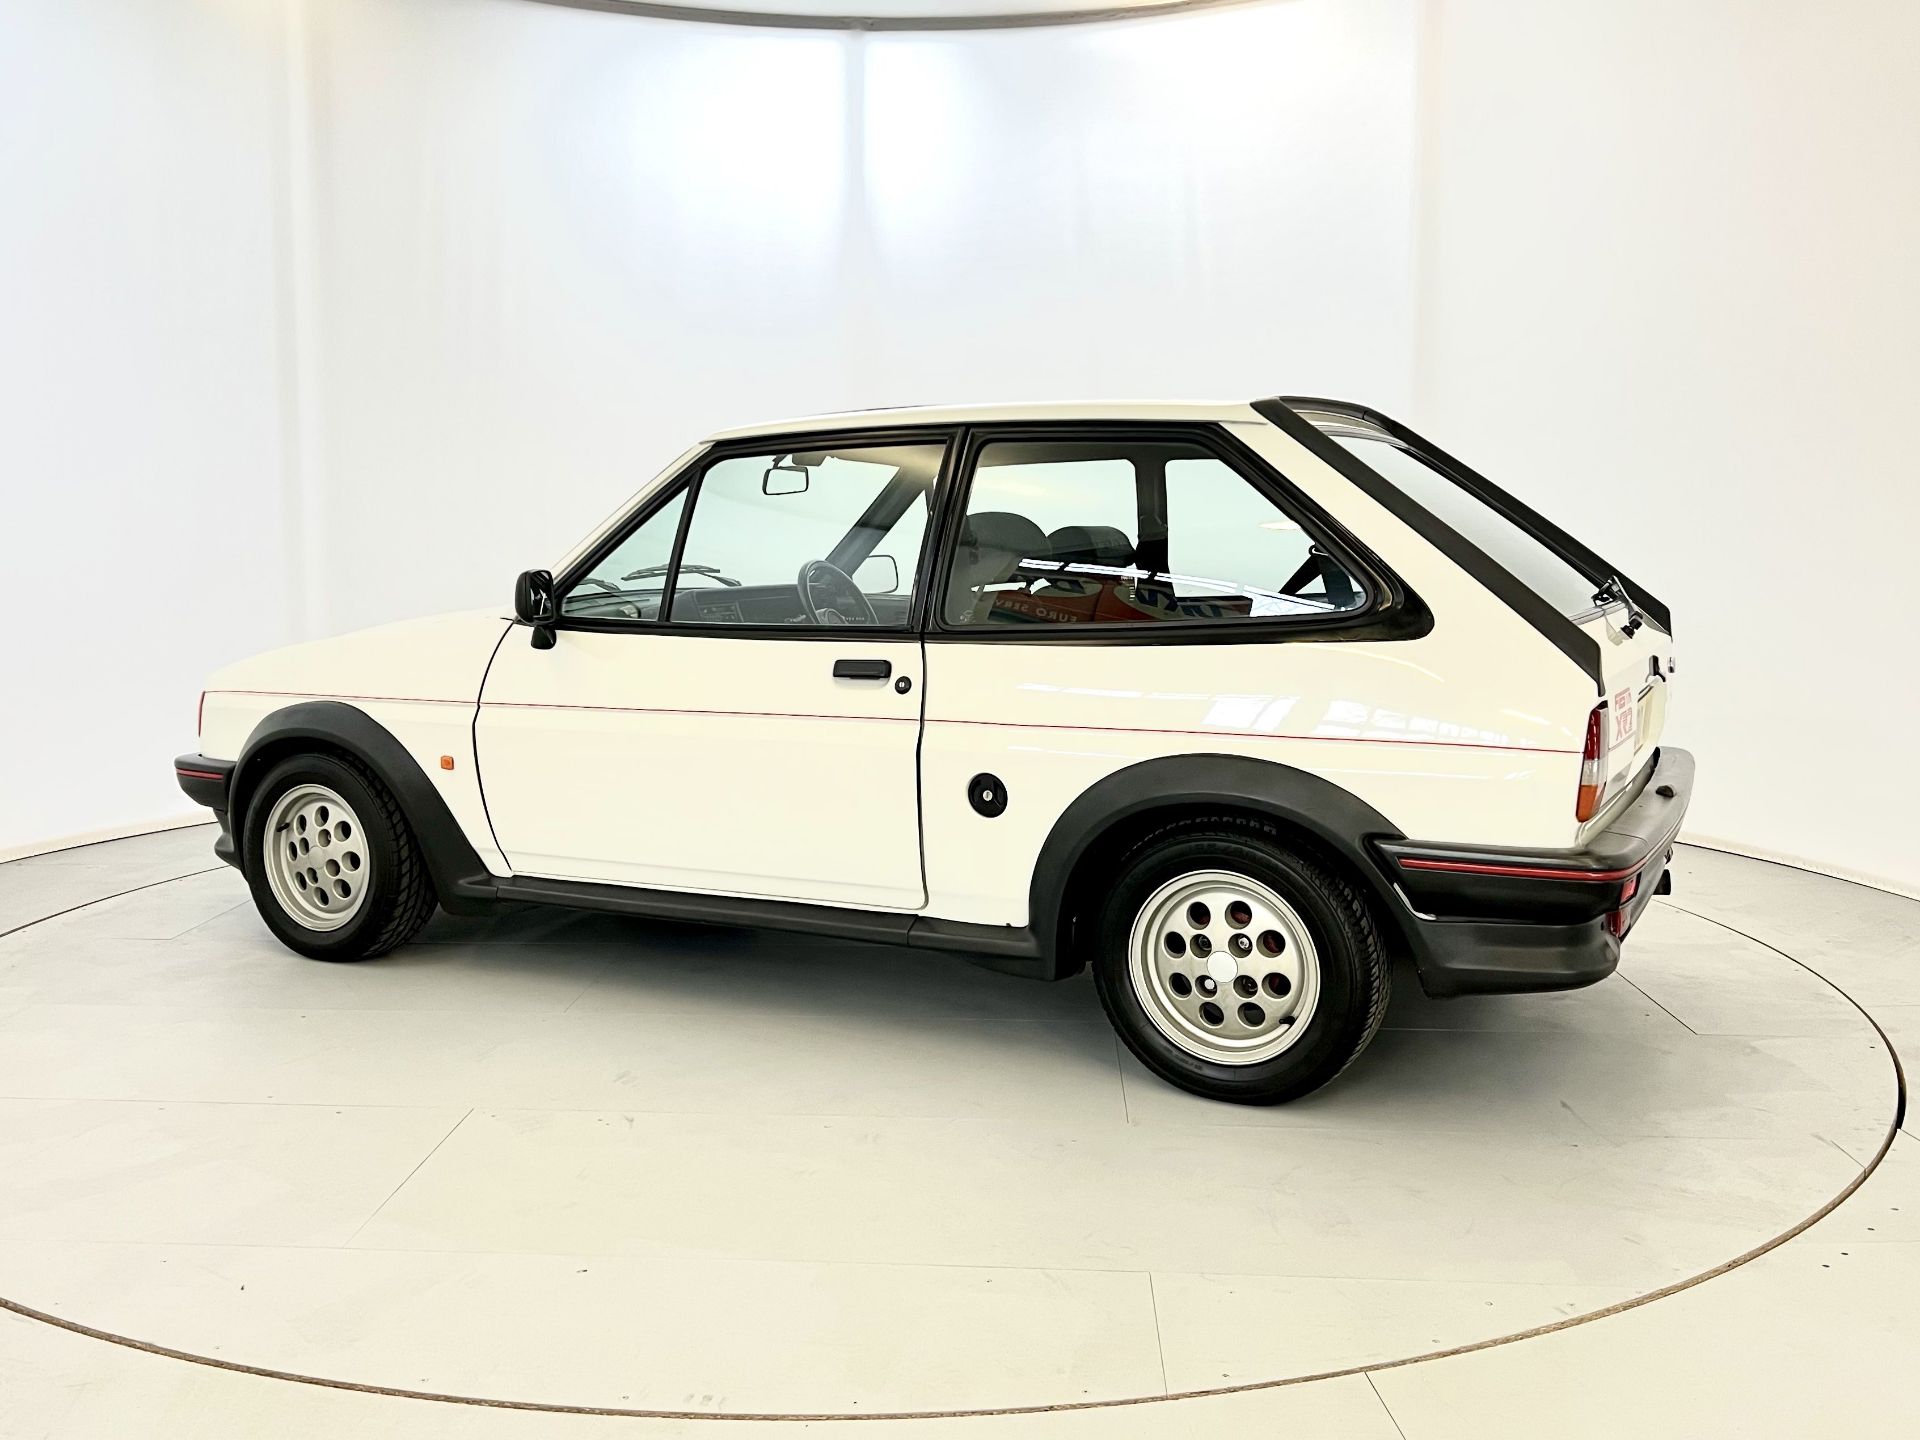 Ford Fiesta XR2 - Image 6 of 37